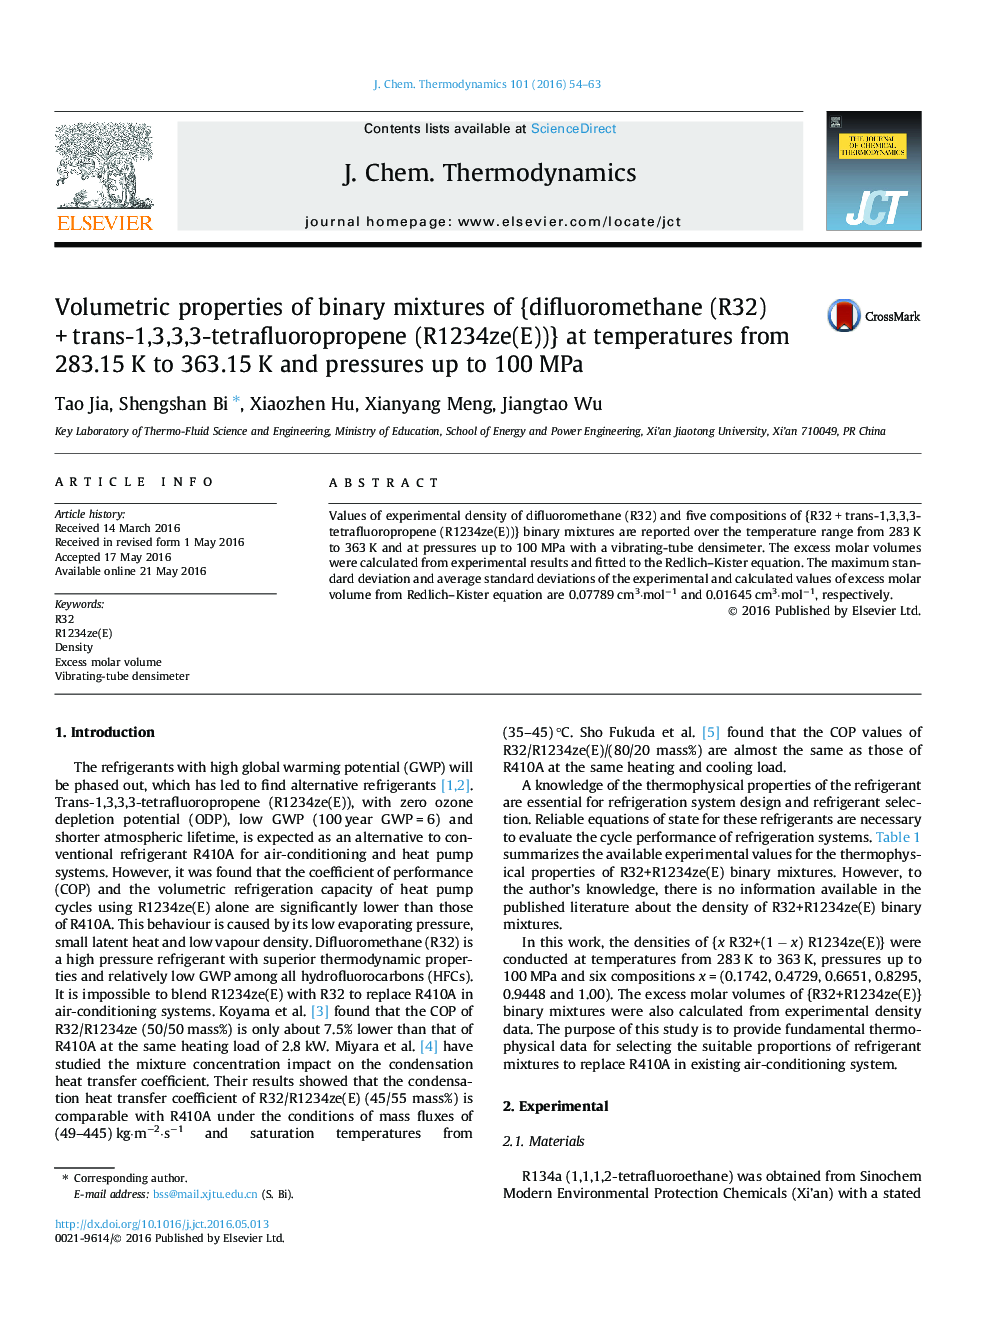 Volumetric properties of binary mixtures of {difluoromethane (R32) + trans-1,3,3,3-tetrafluoropropene (R1234ze(E))} at temperatures from 283.15 K to 363.15 K and pressures up to 100 MPa